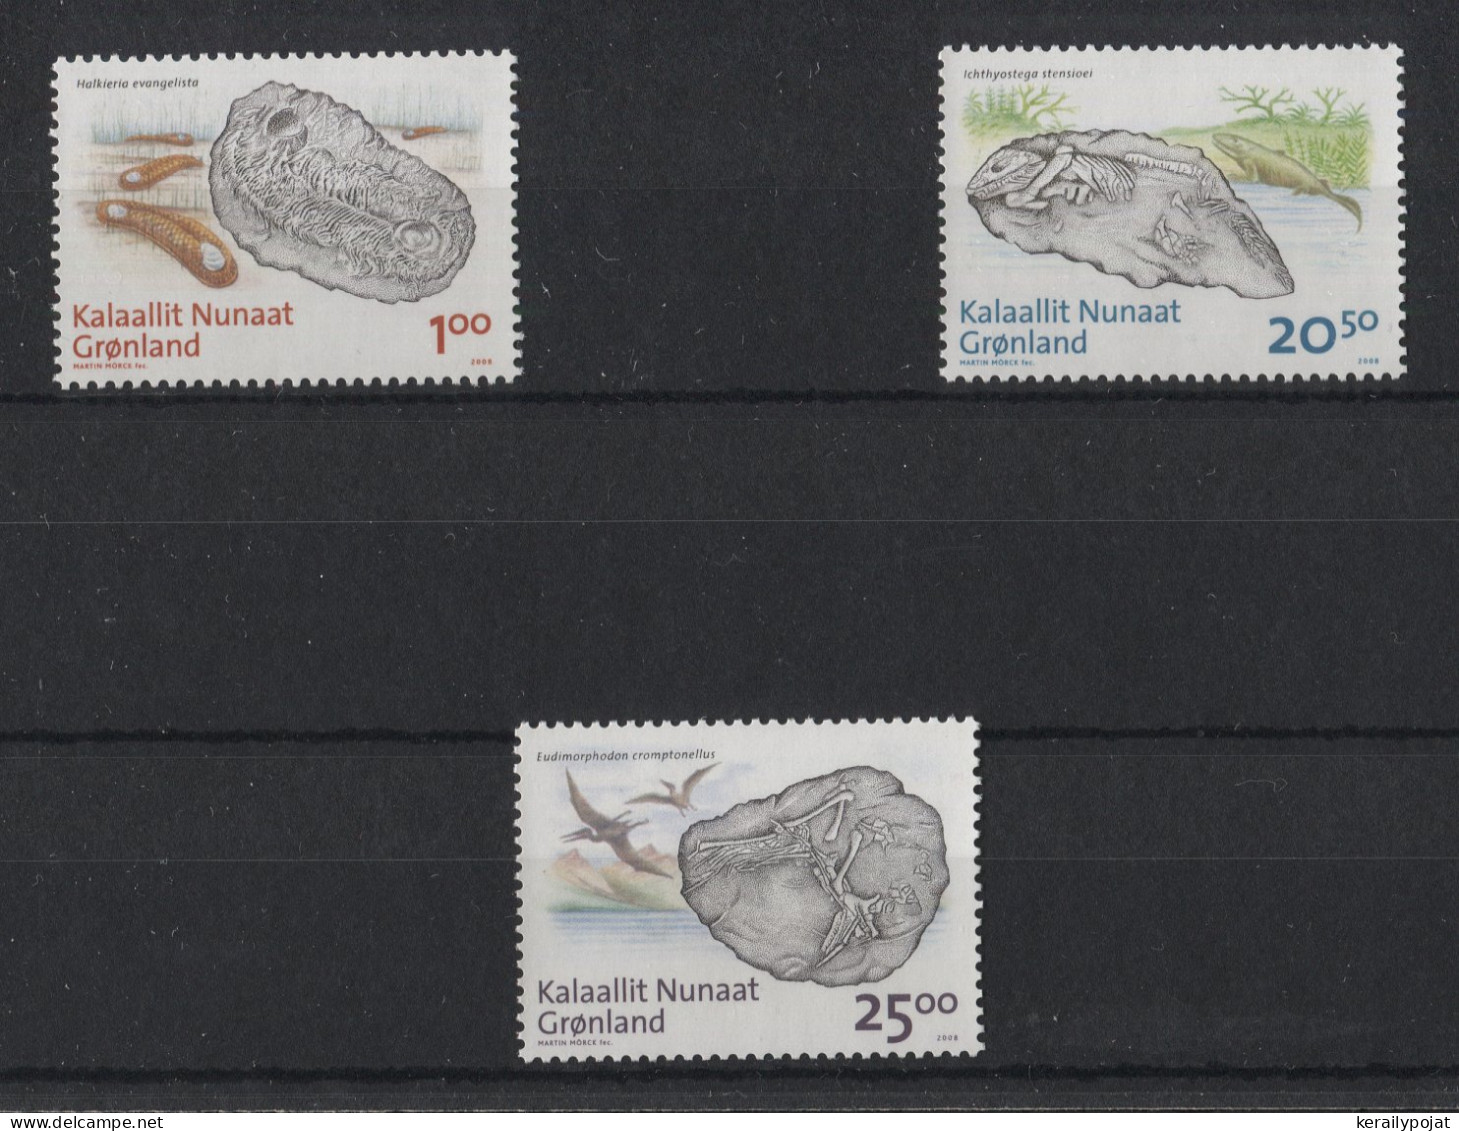 Greenland - 2008 Greenland Fossil Finds MNH__(TH-23170) - Neufs